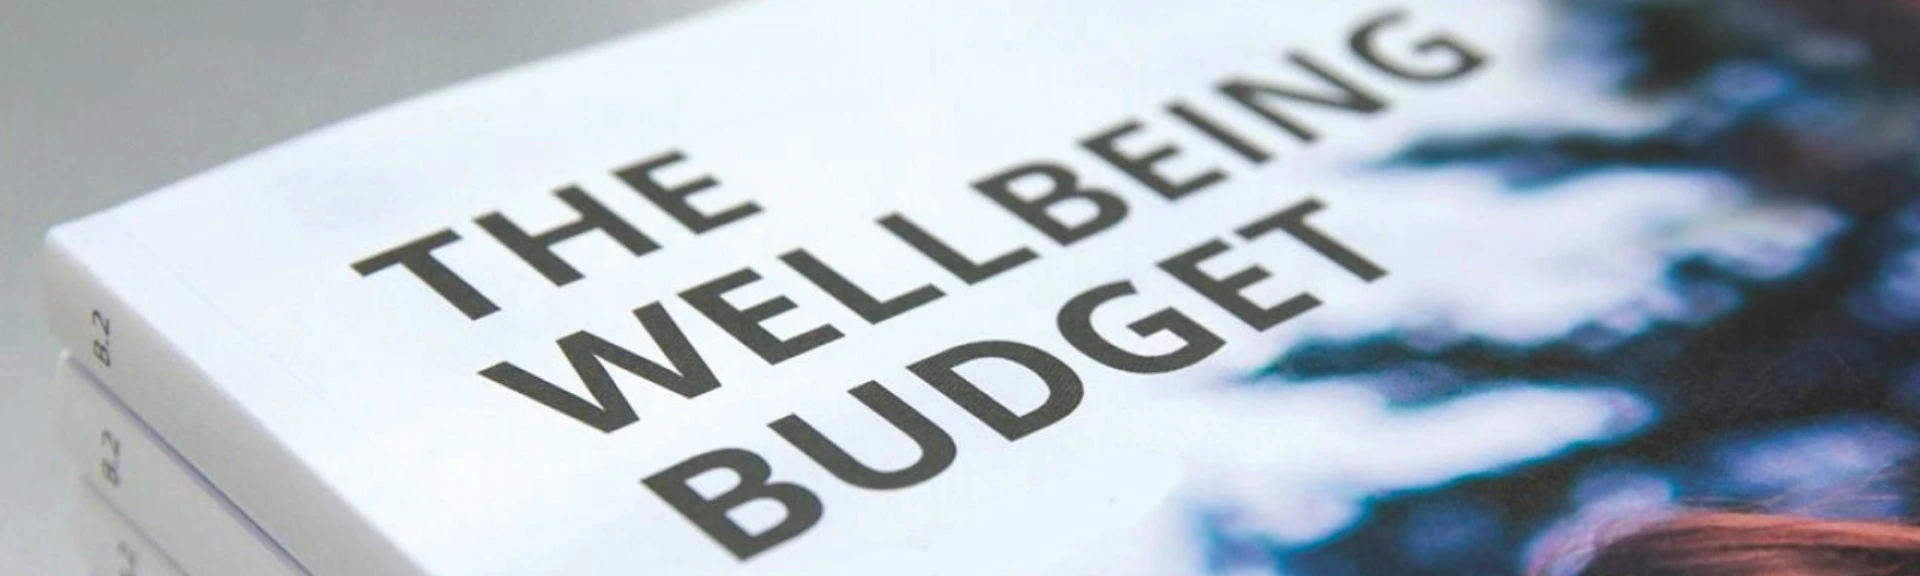 Wellbeing budget